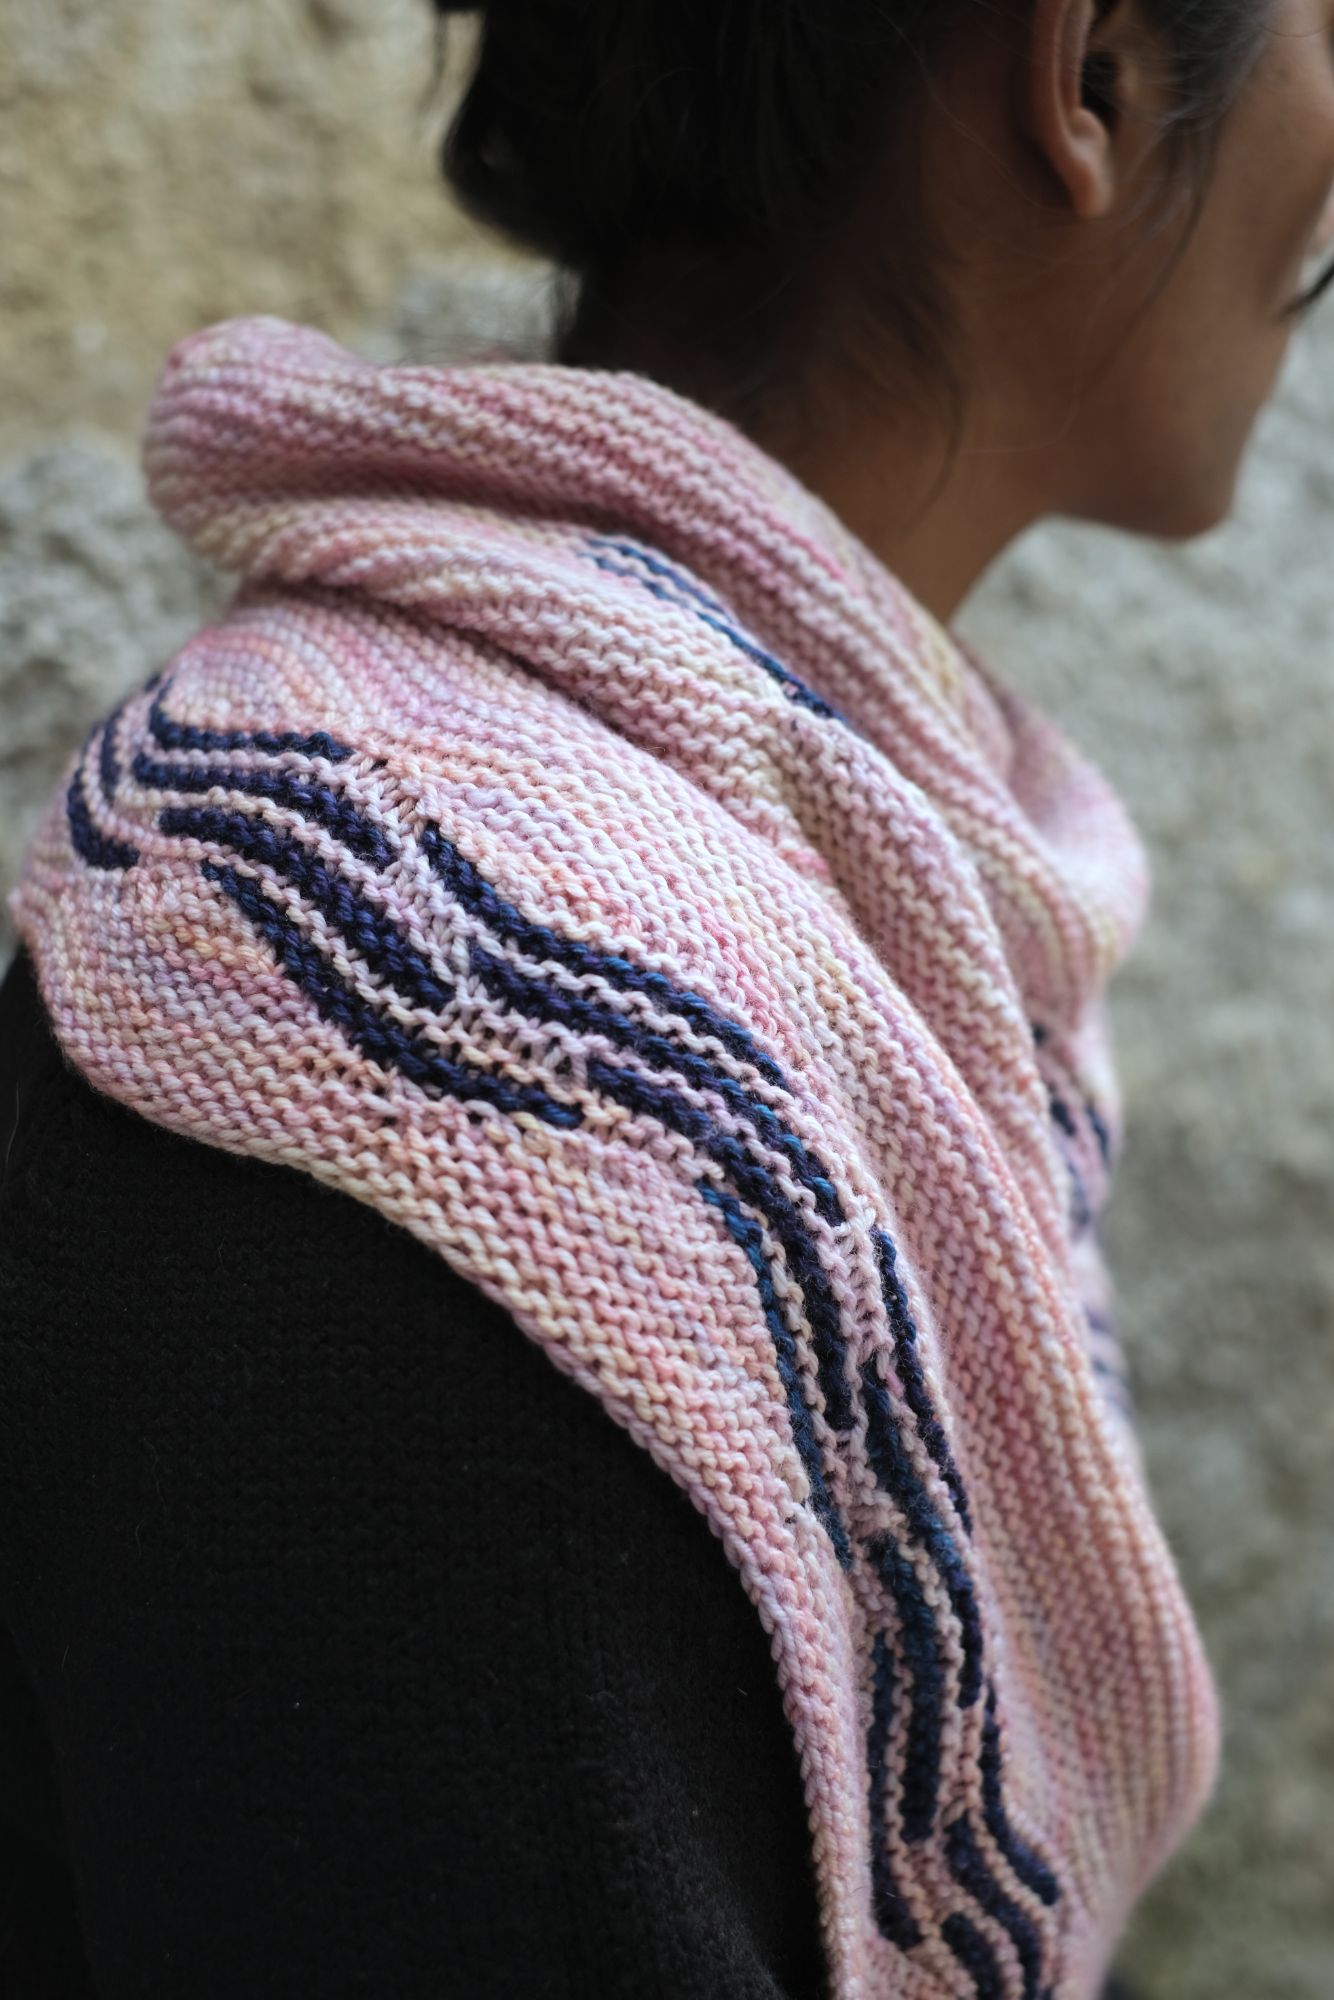  pink knitted shawl draped around their shoulderd which features dark blue sectional waves. close up of the shawl